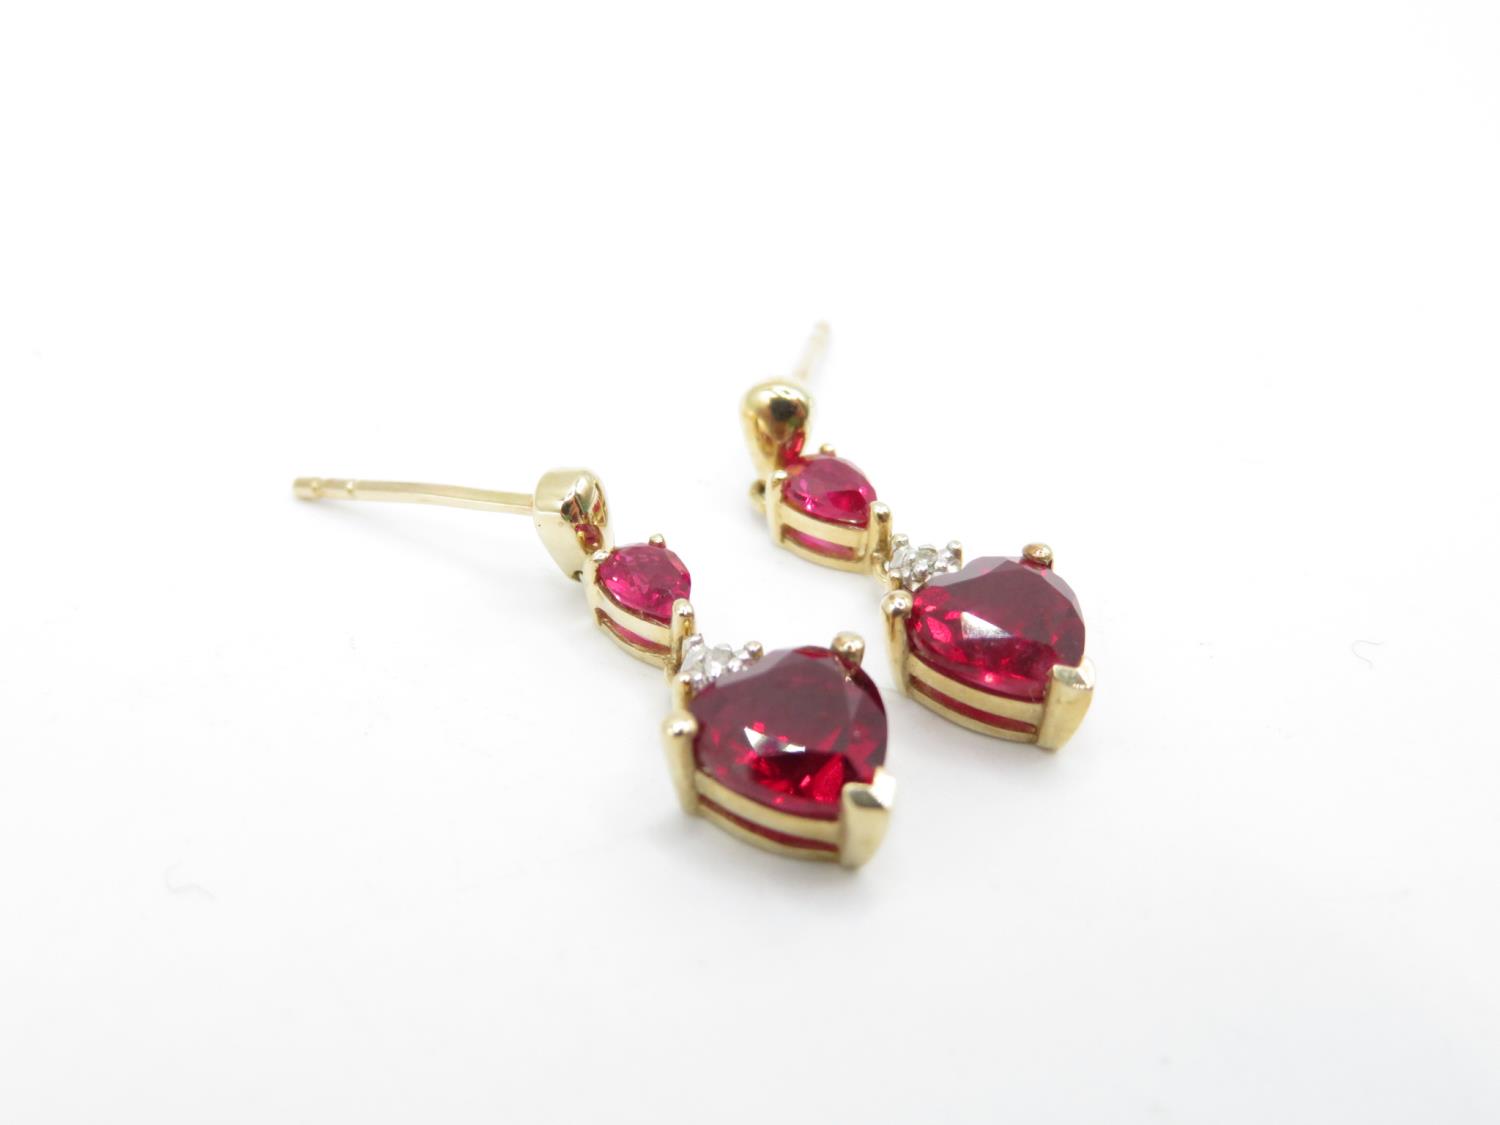 Boxed set of 9ct gold drop earrings with red stones in shape of hearts 4.7g - Image 2 of 5